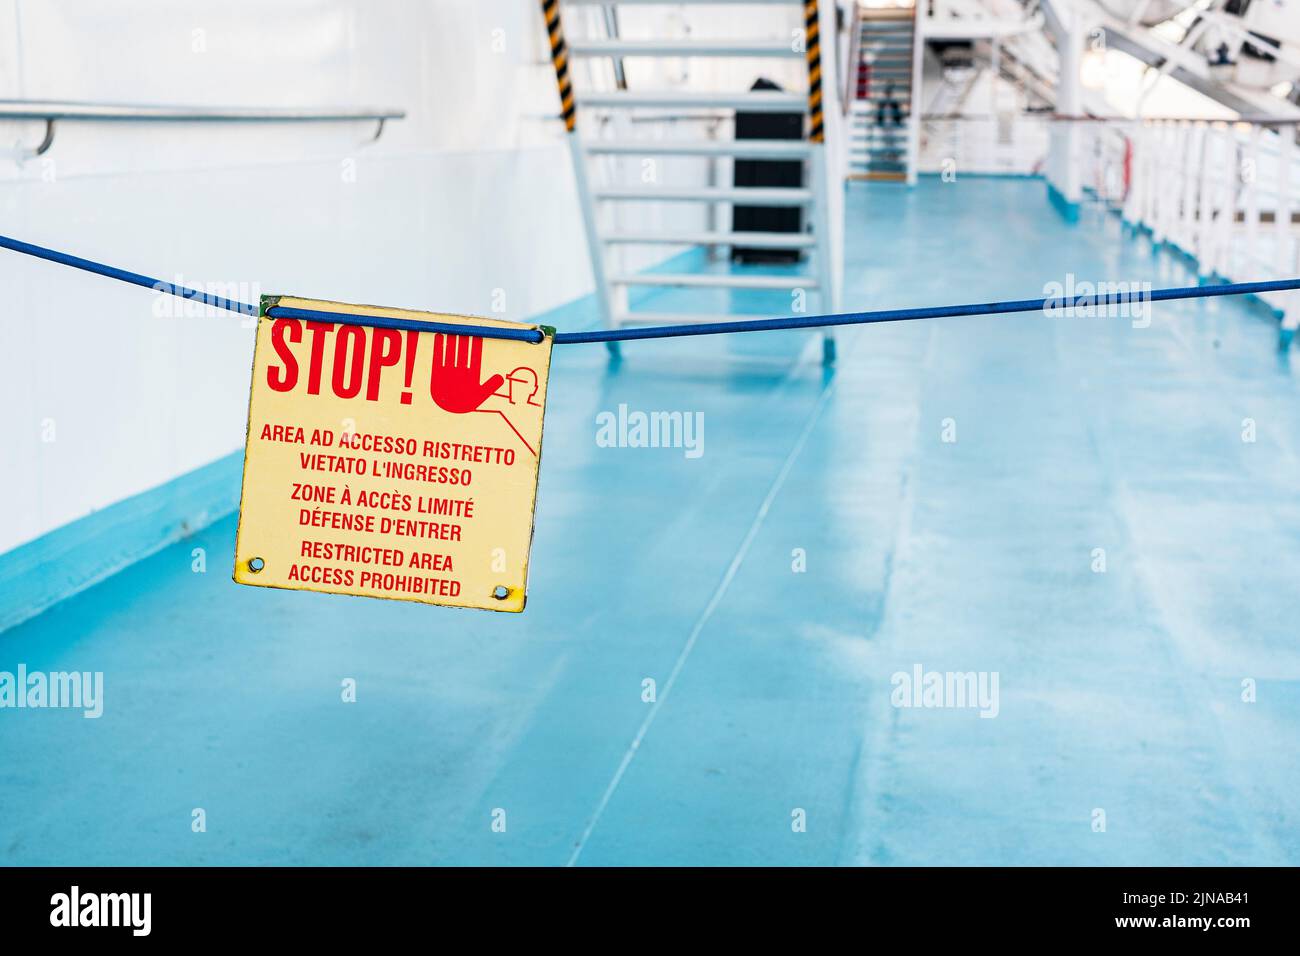 stop sign on walking deck on the ship at sea Stock Photo